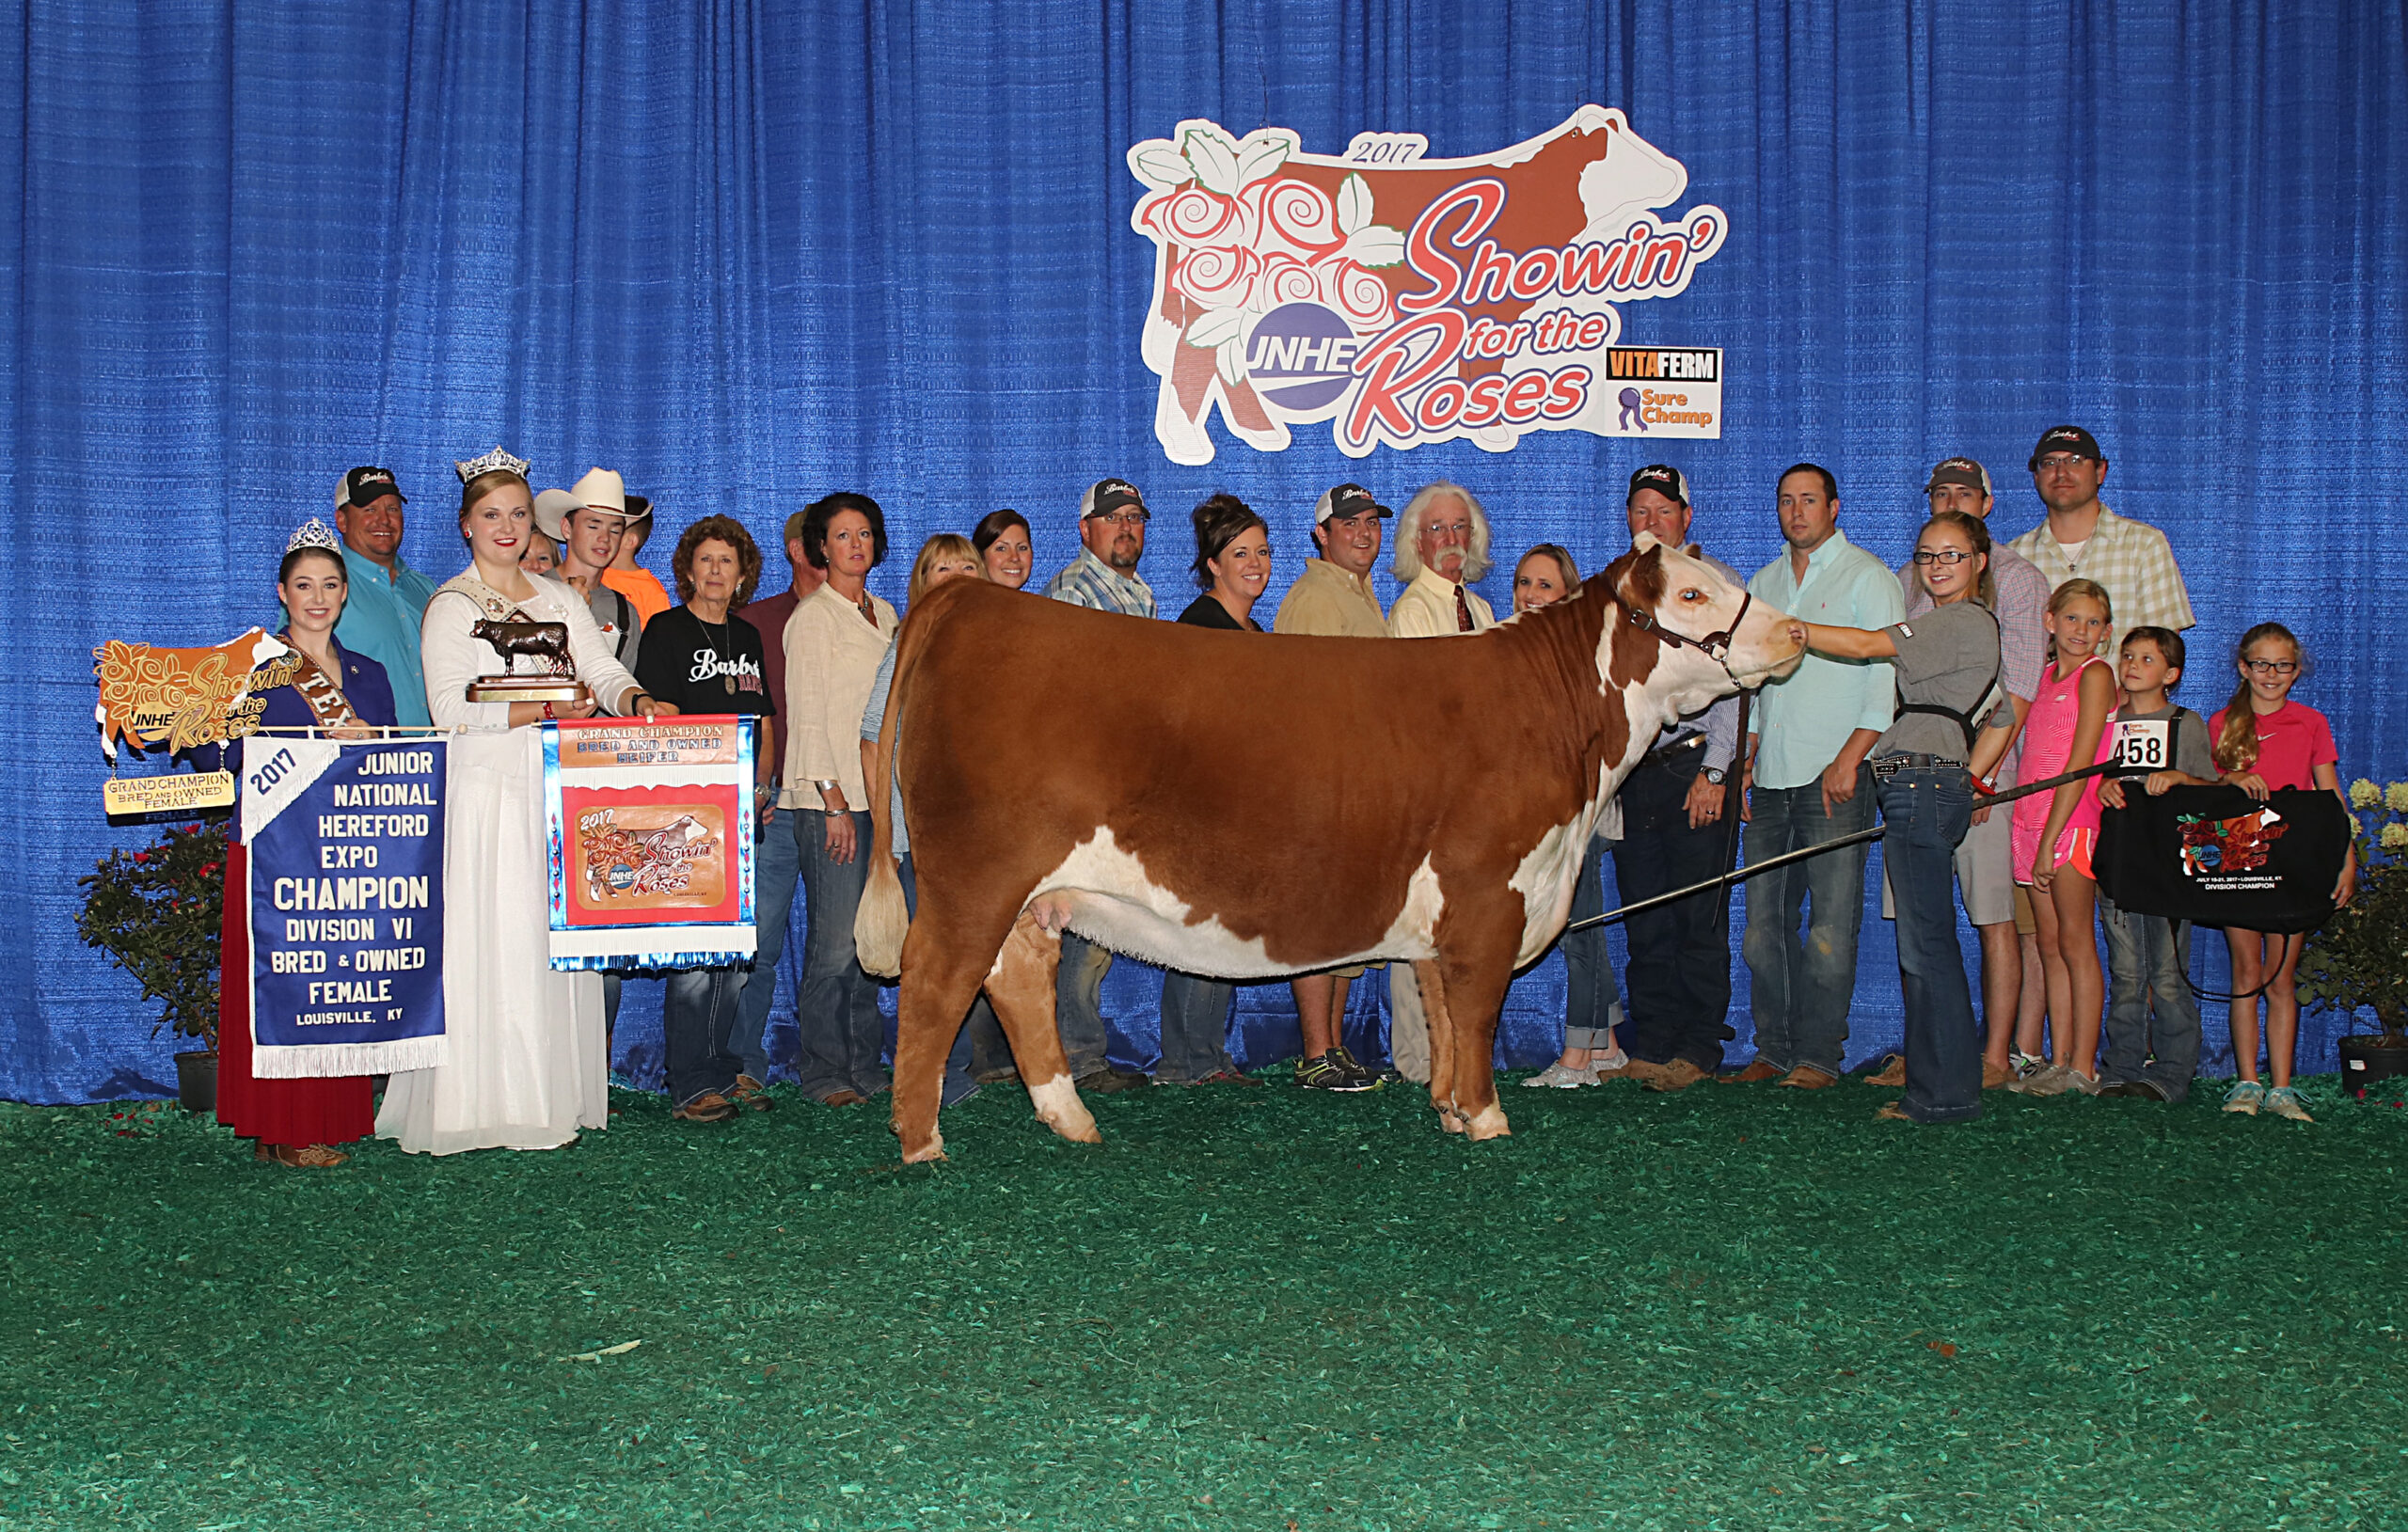 Barber, Jensen Win Bred-and-Owned Female Titles at Junior National Hereford Expo